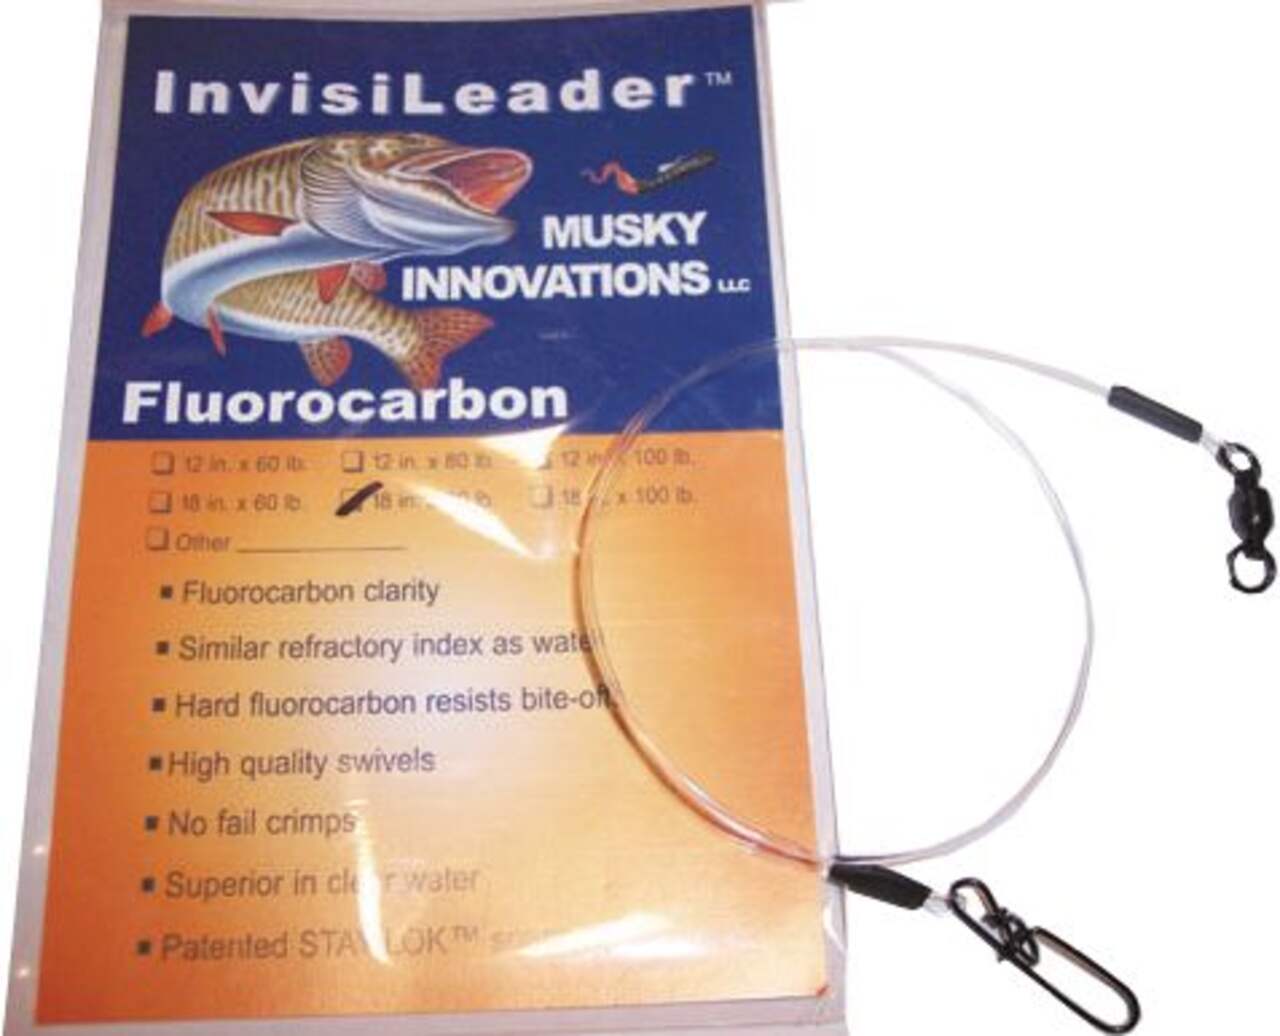 Musky Innovations Fluorocarbon Invisi-Leaders™ Fishing Leader, 12